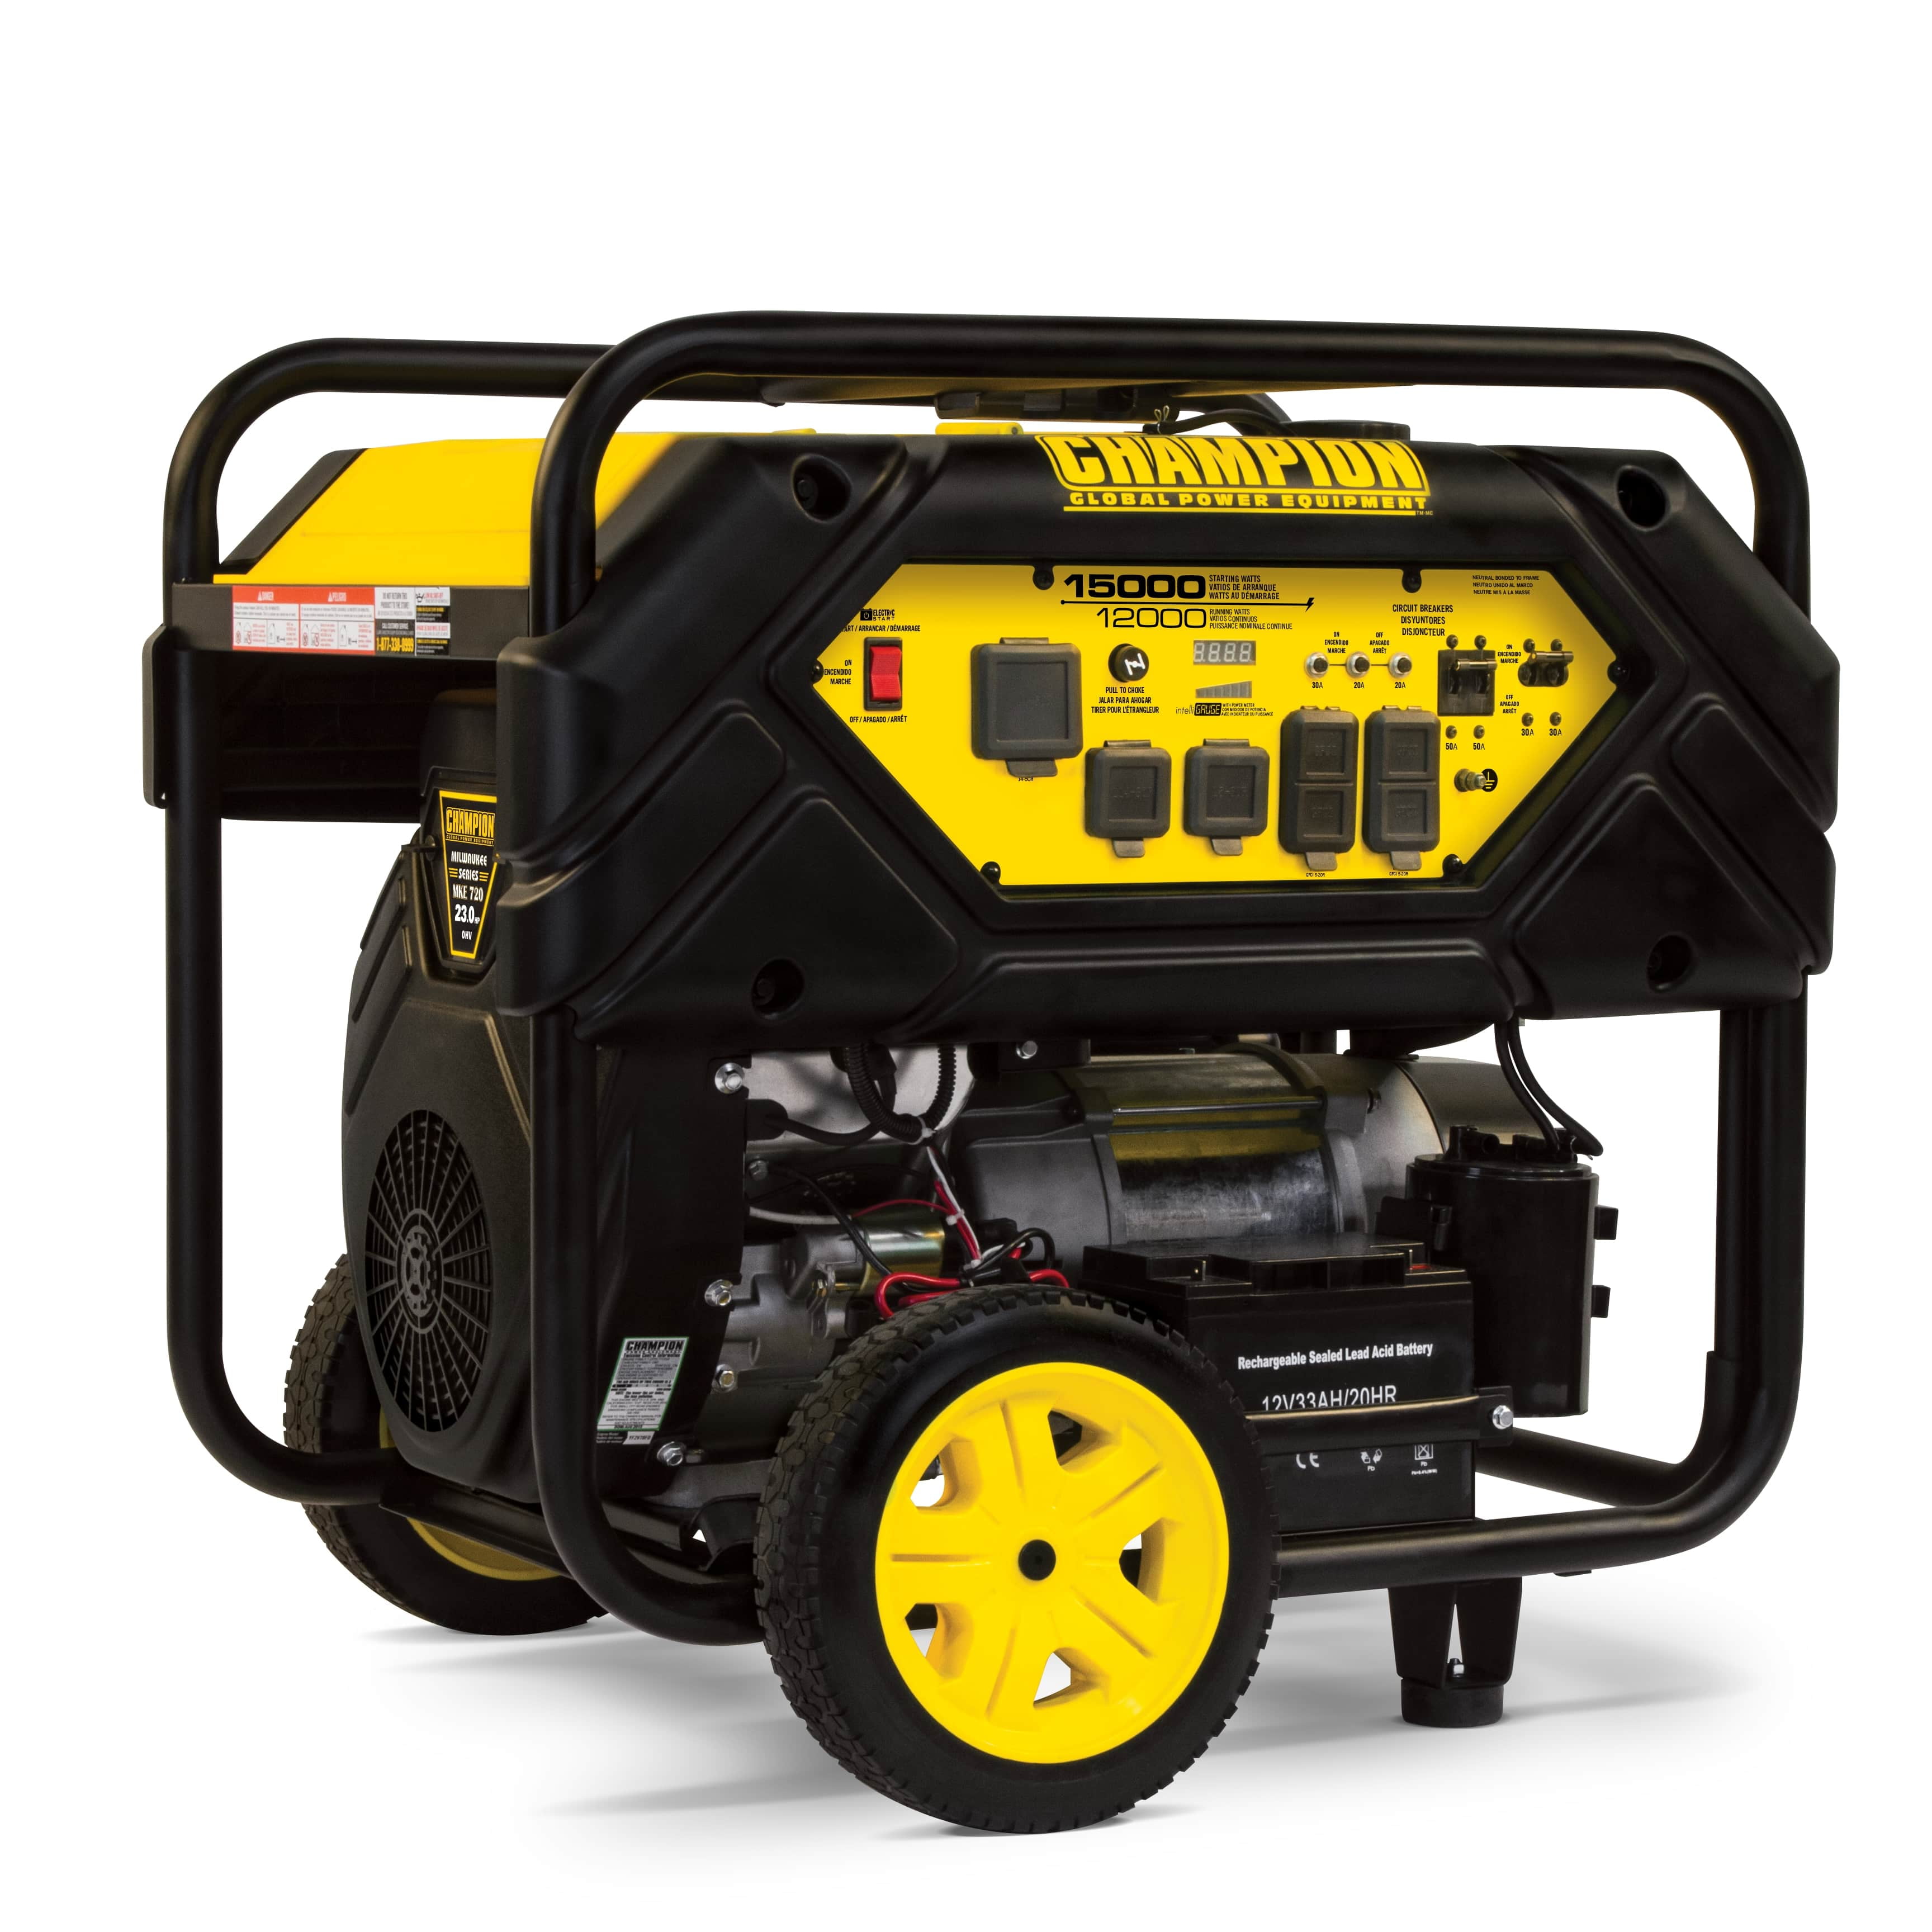 Bandit hjælpe tricky Champion Power Equipment 15,000/12,000 Watts Portable Generator with  Electric Start and Lift Hook - Walmart.com